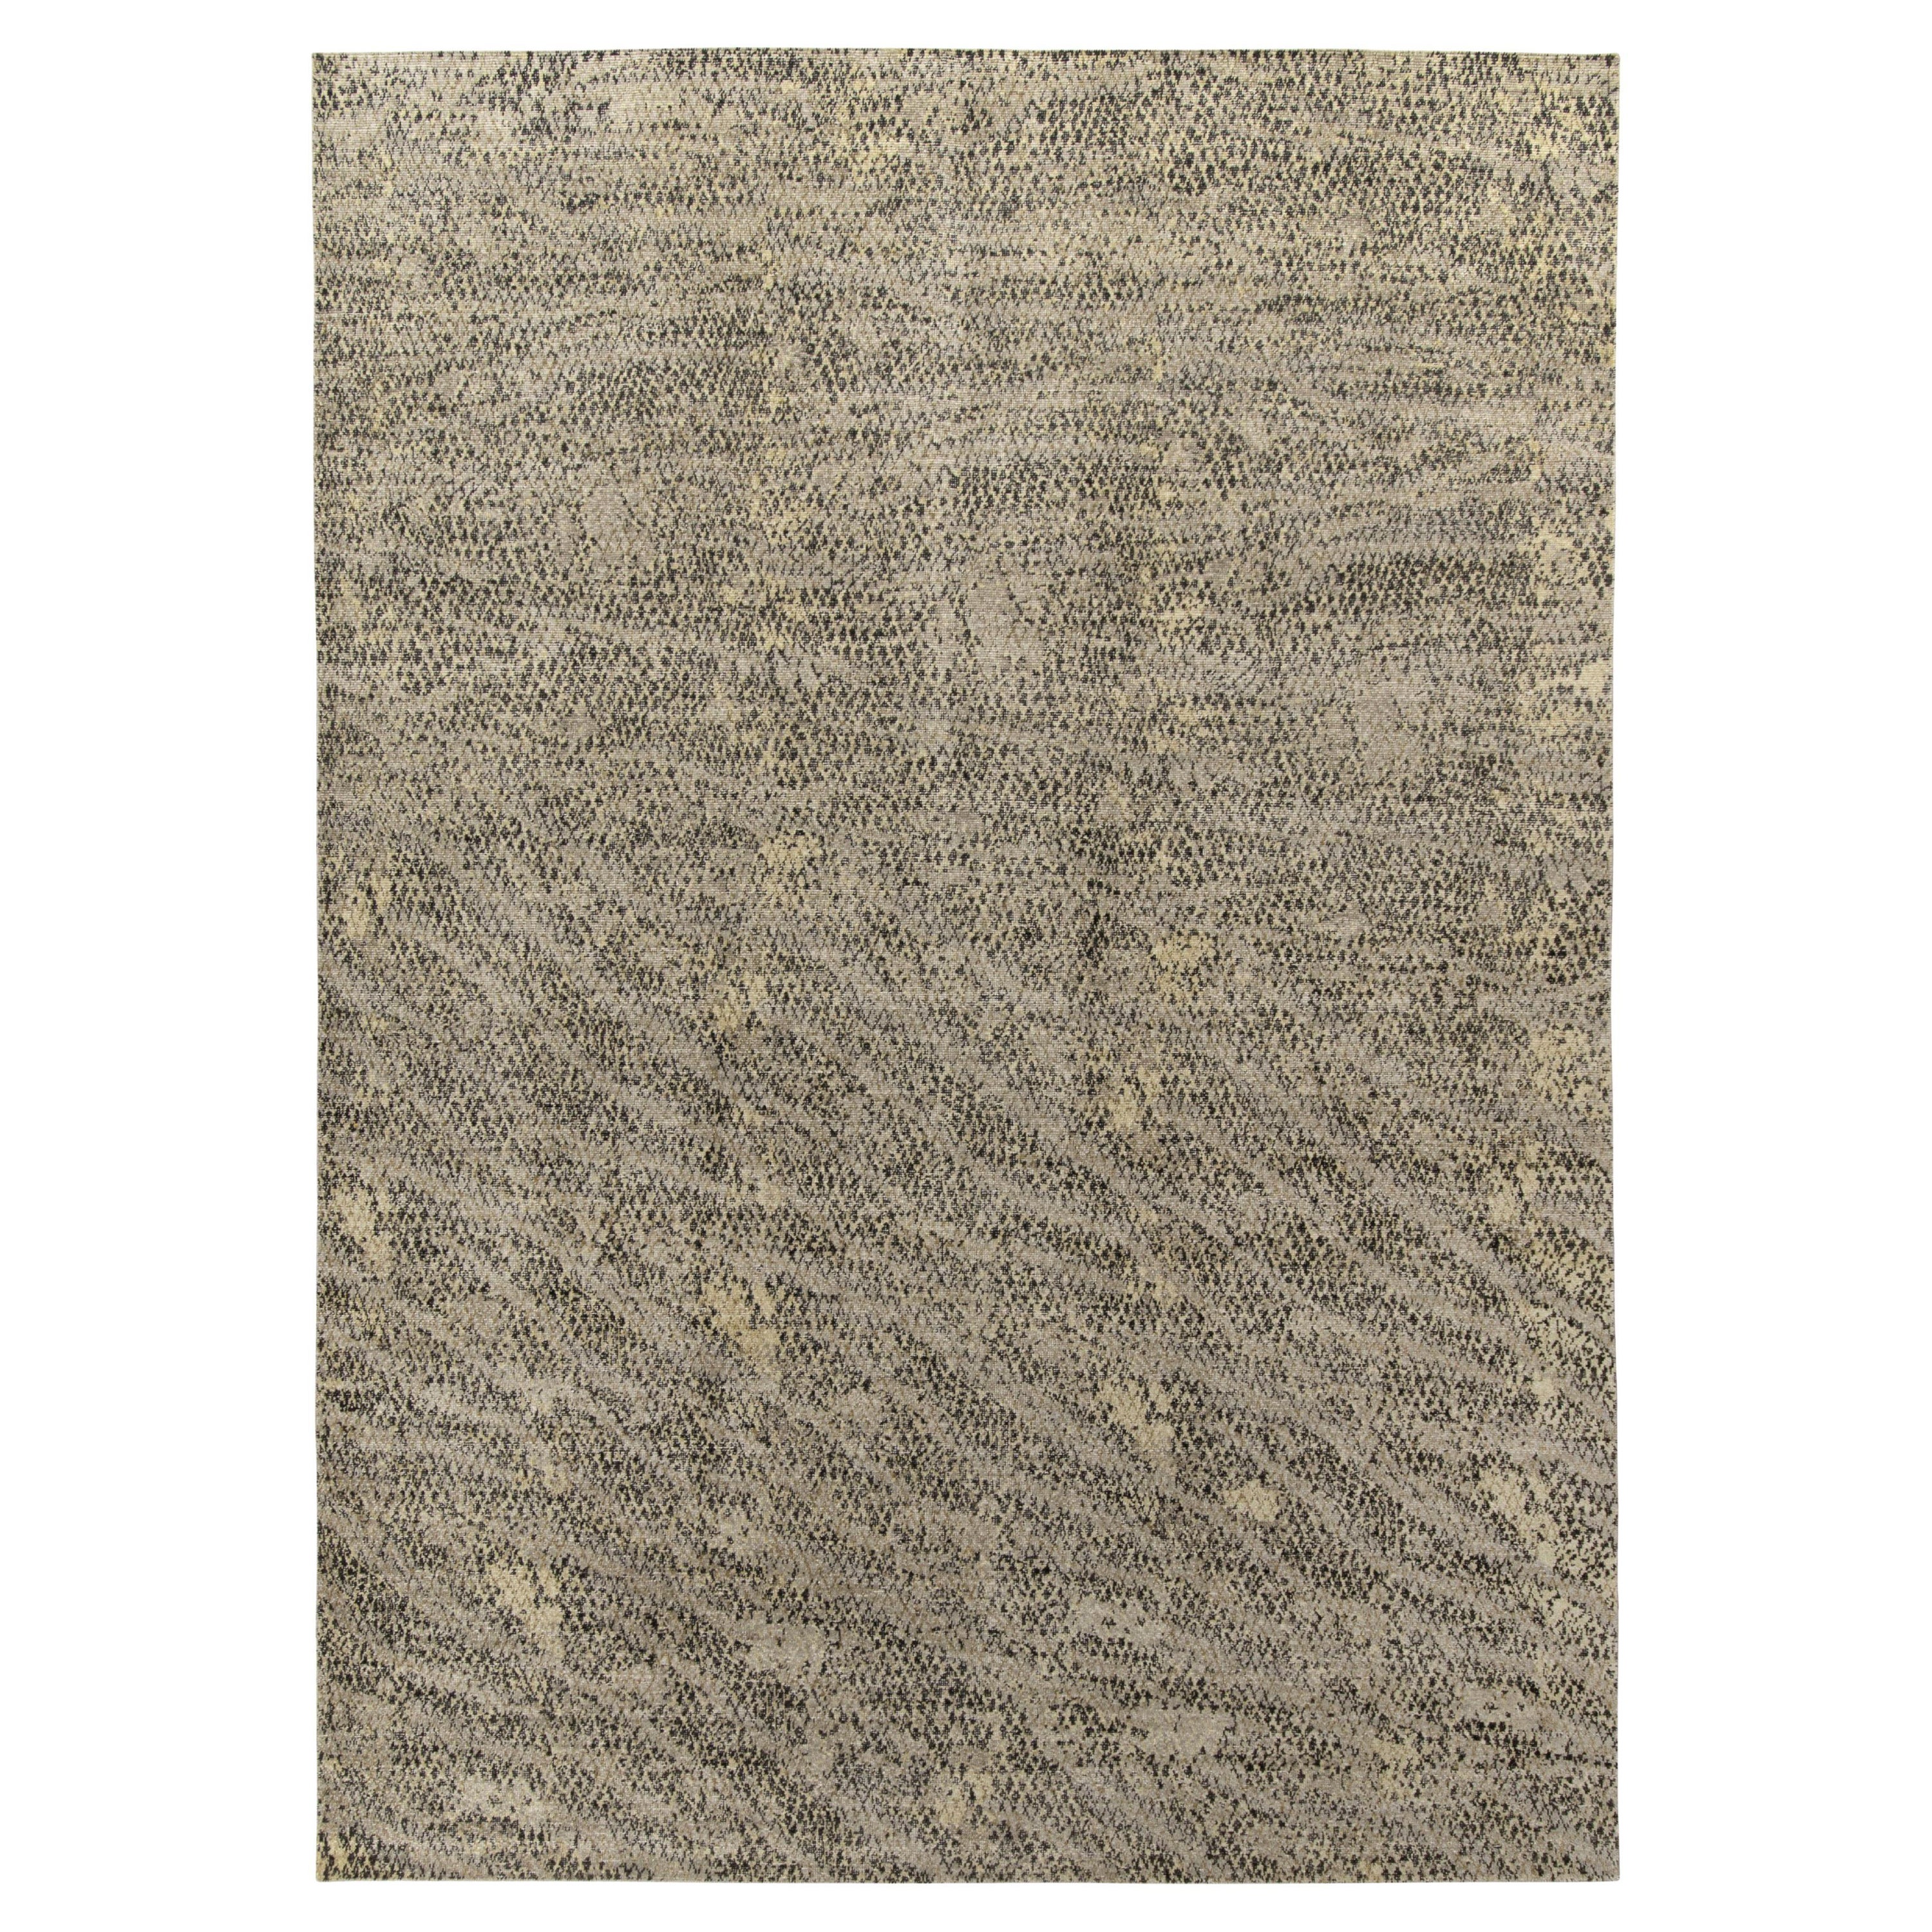 Rug & Kilim’s Distressed Style Abstract Rug in Beige-Brown Geometric Pattern For Sale